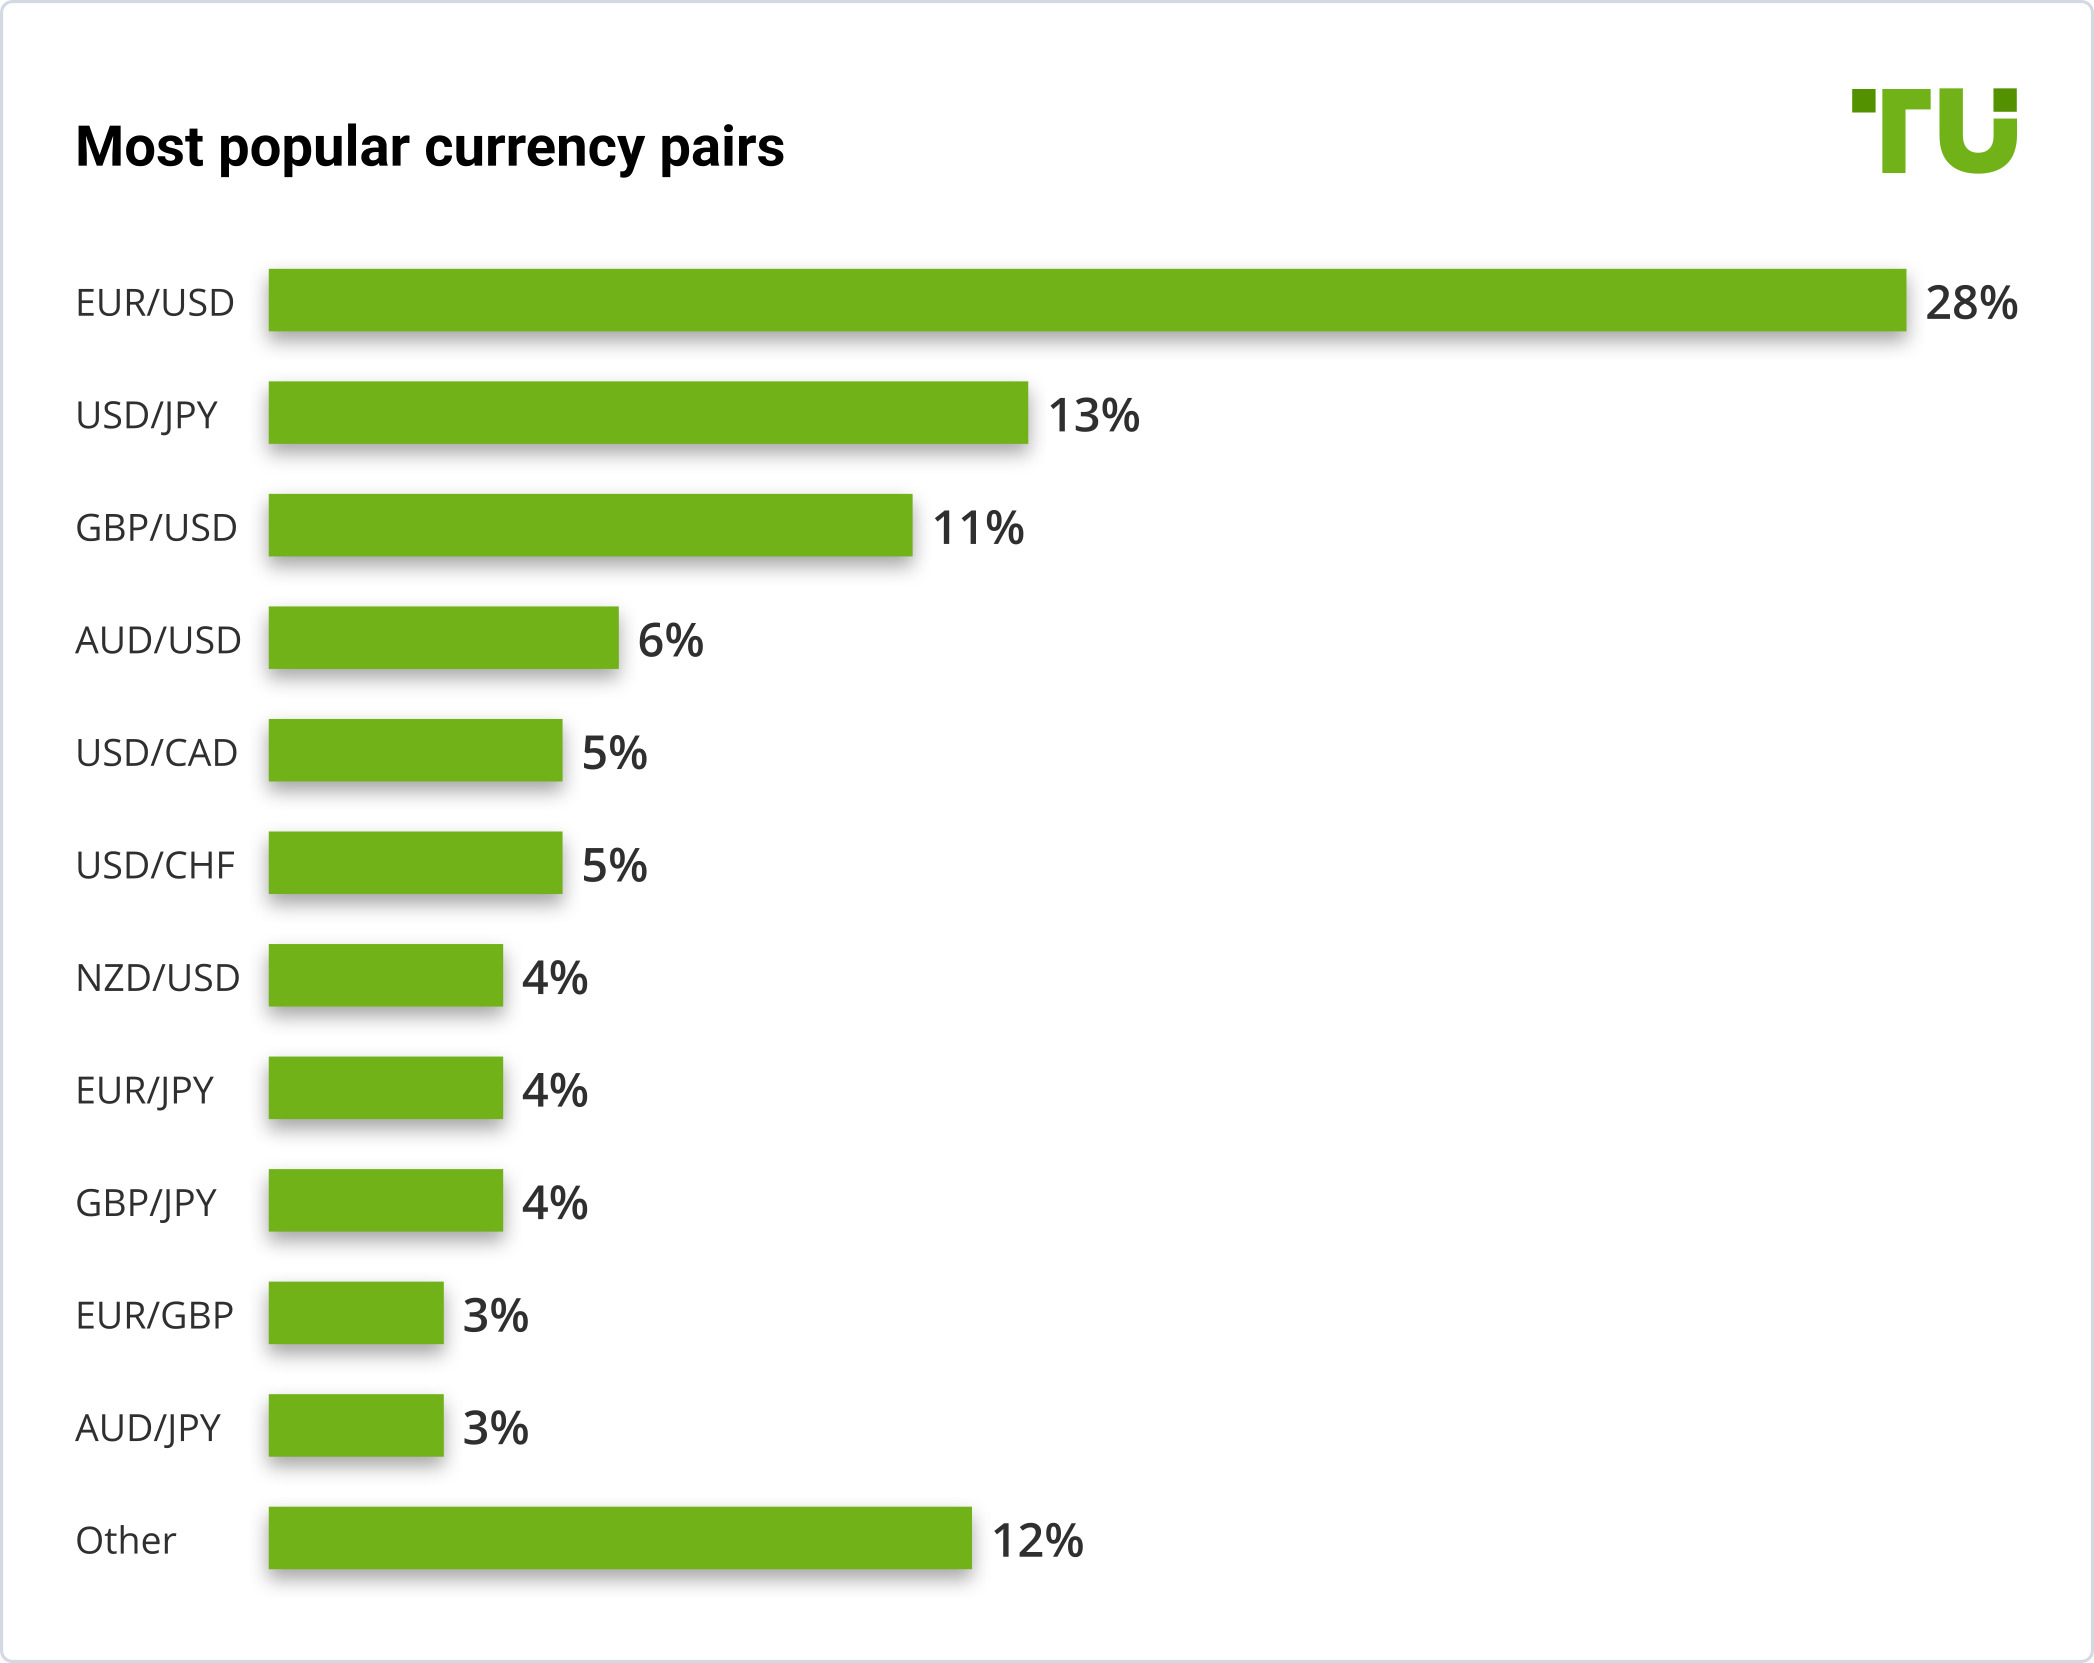 The most popular currency pairs